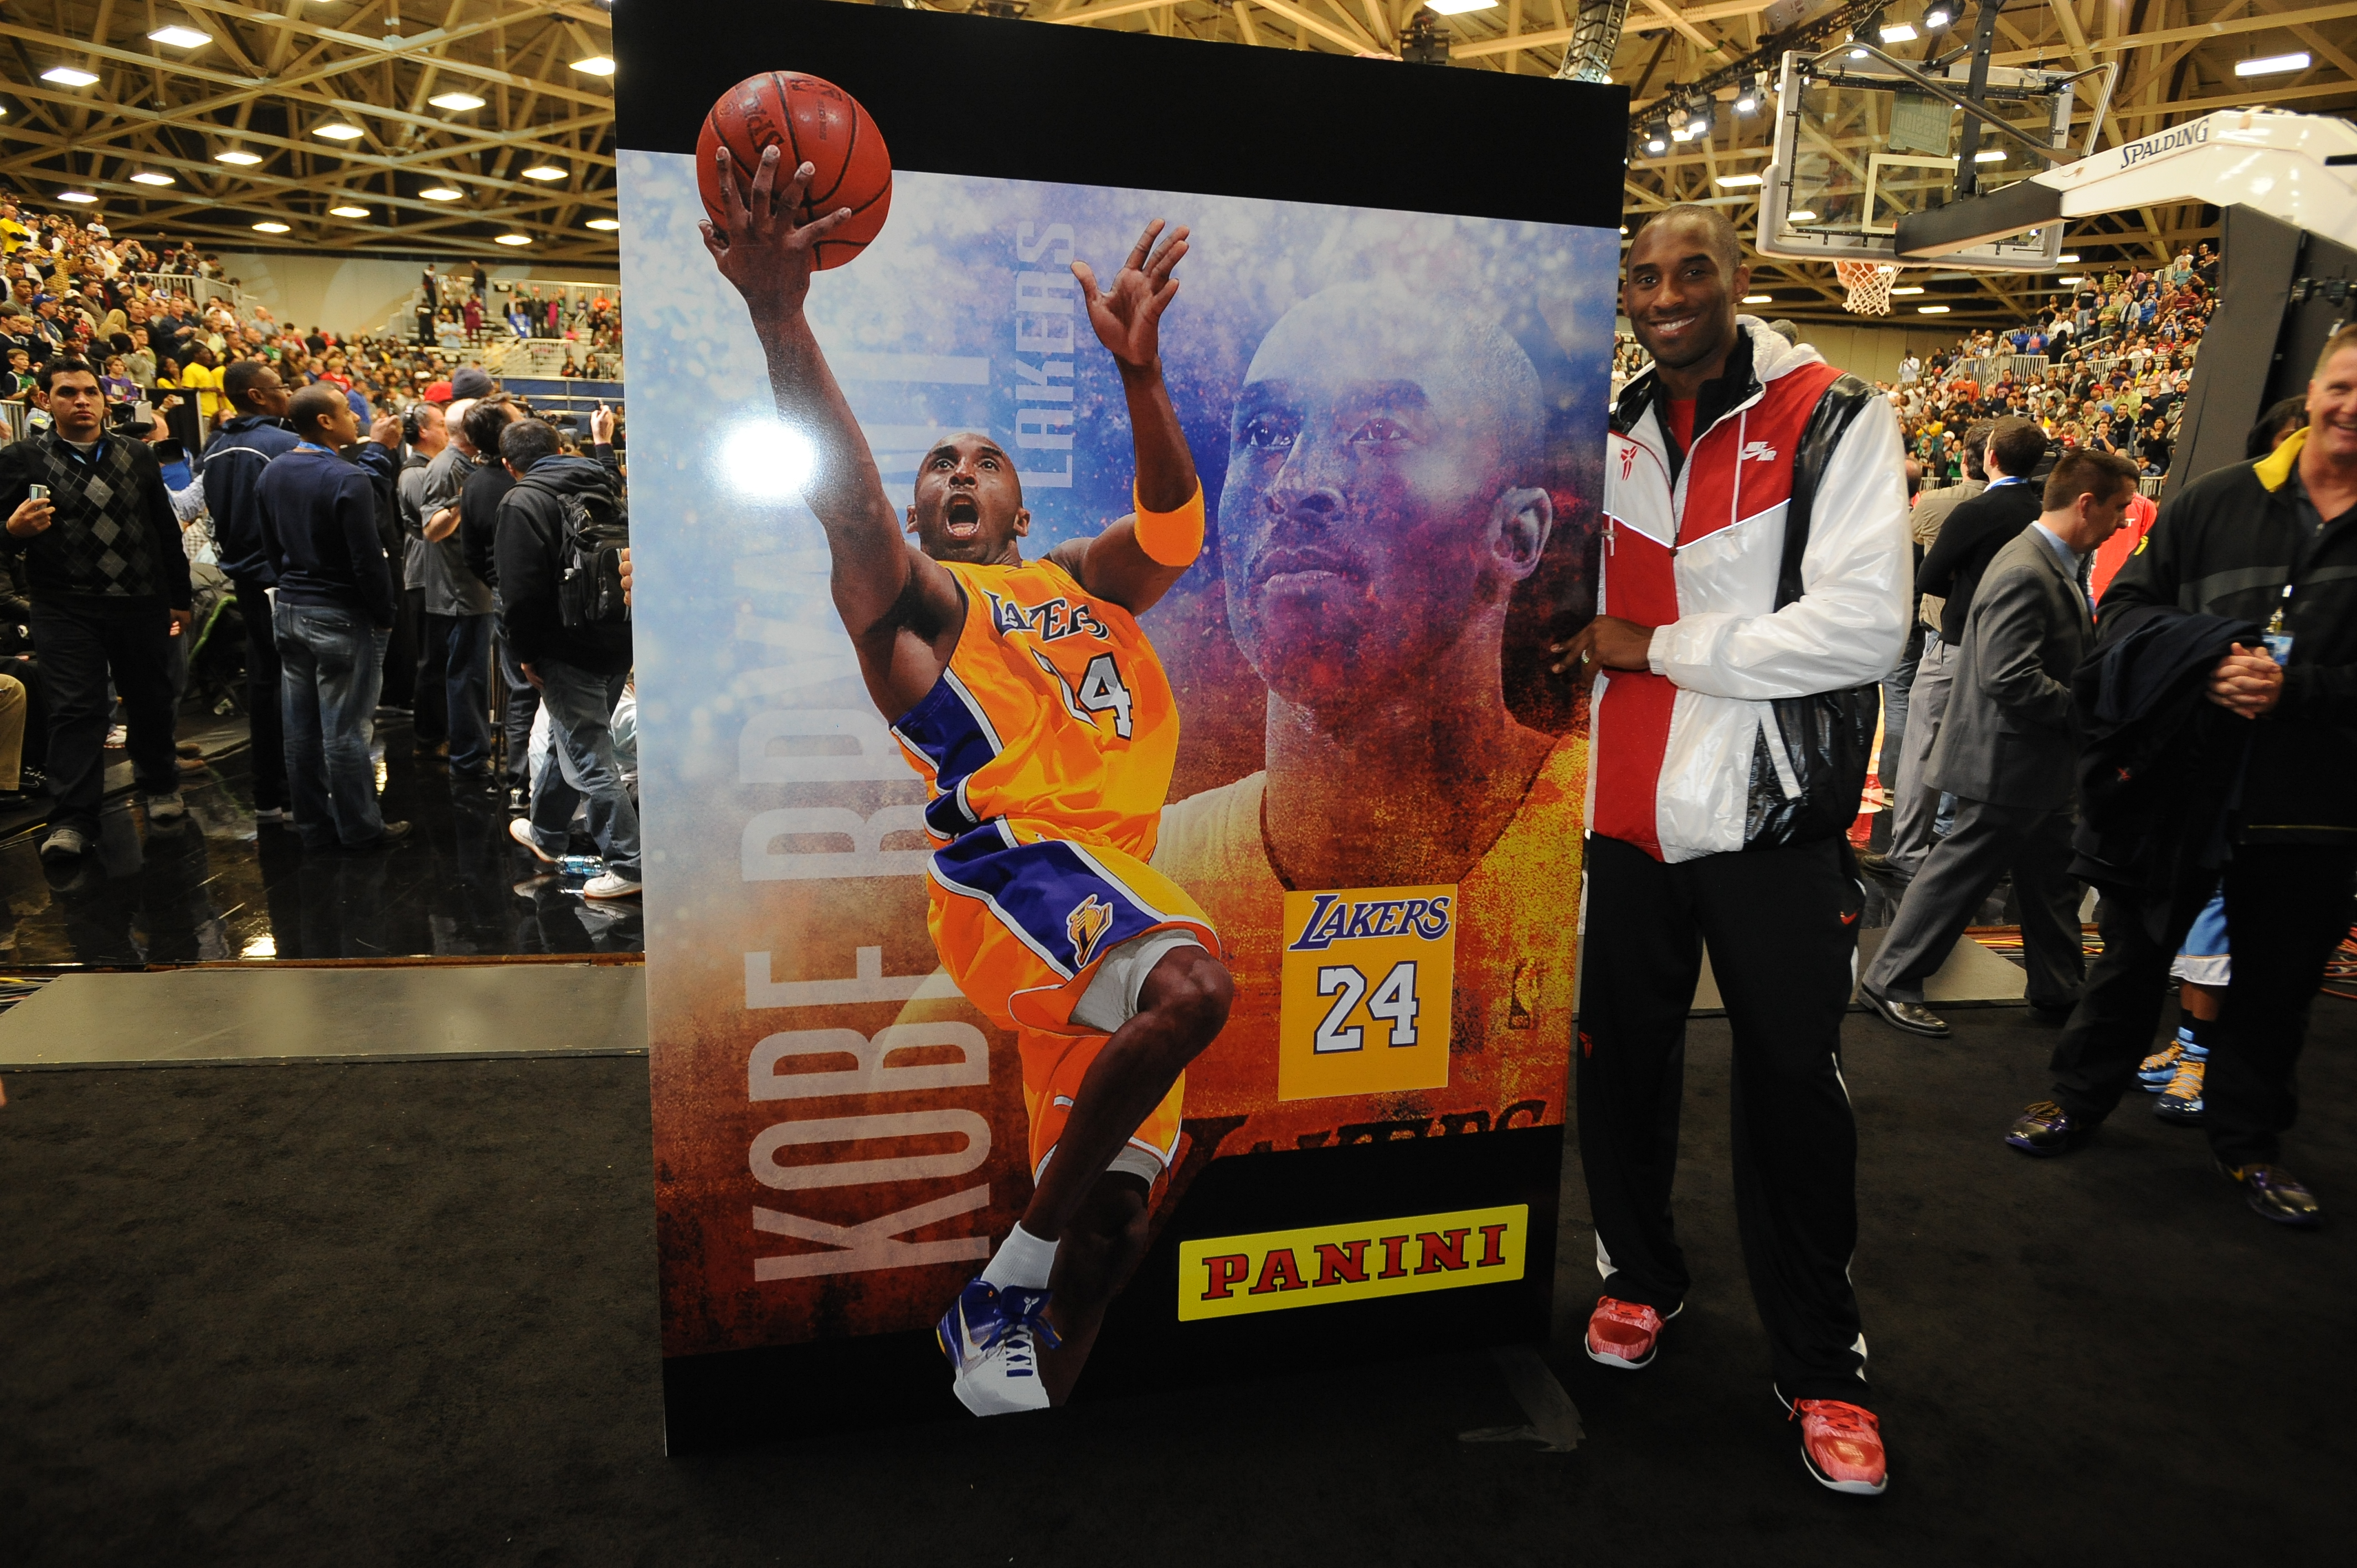 Kobe Bryant #24 of the Western Conference poses for a photo next to the world’s largest Kobe Bryant panini card during the West All-Stars Practice on center court during NBA Jam Session Presented by Adidas on February 13, 2010 at the Dallas Convention Center in Dallas, Texas.&nbsp;